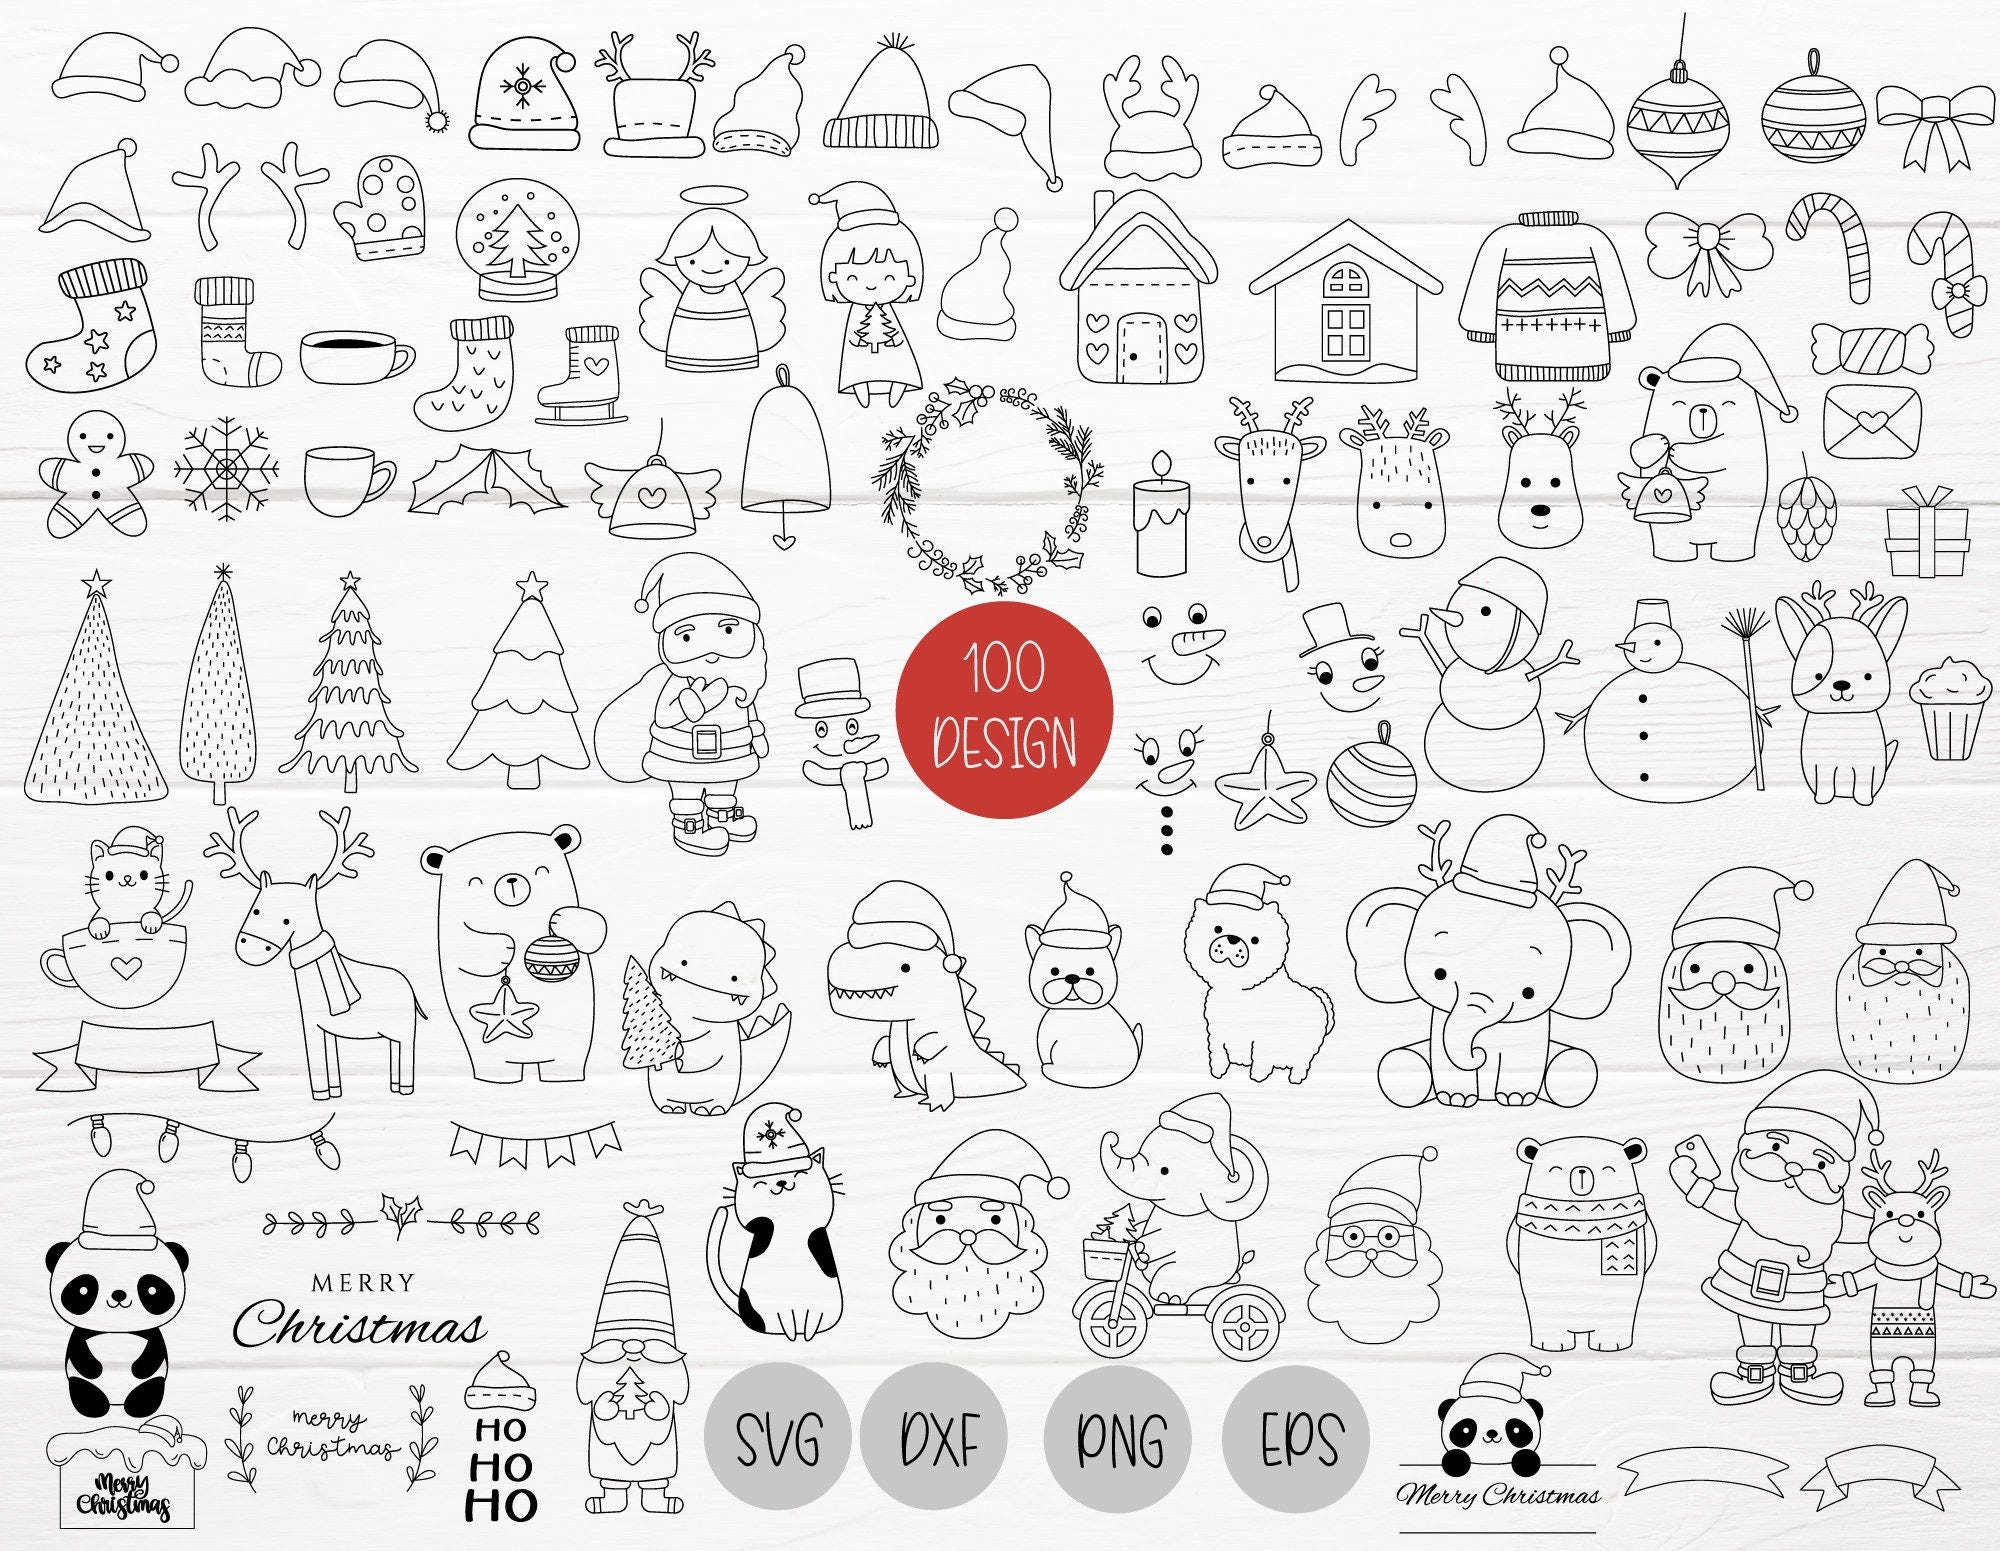 100 Christmas Bundle SVG For Cut File,Christmas Tree,ornaments Doodle, hand drawn,Cartoon, svg,dxf,png,eps, for cricut Silhouette,Cameo